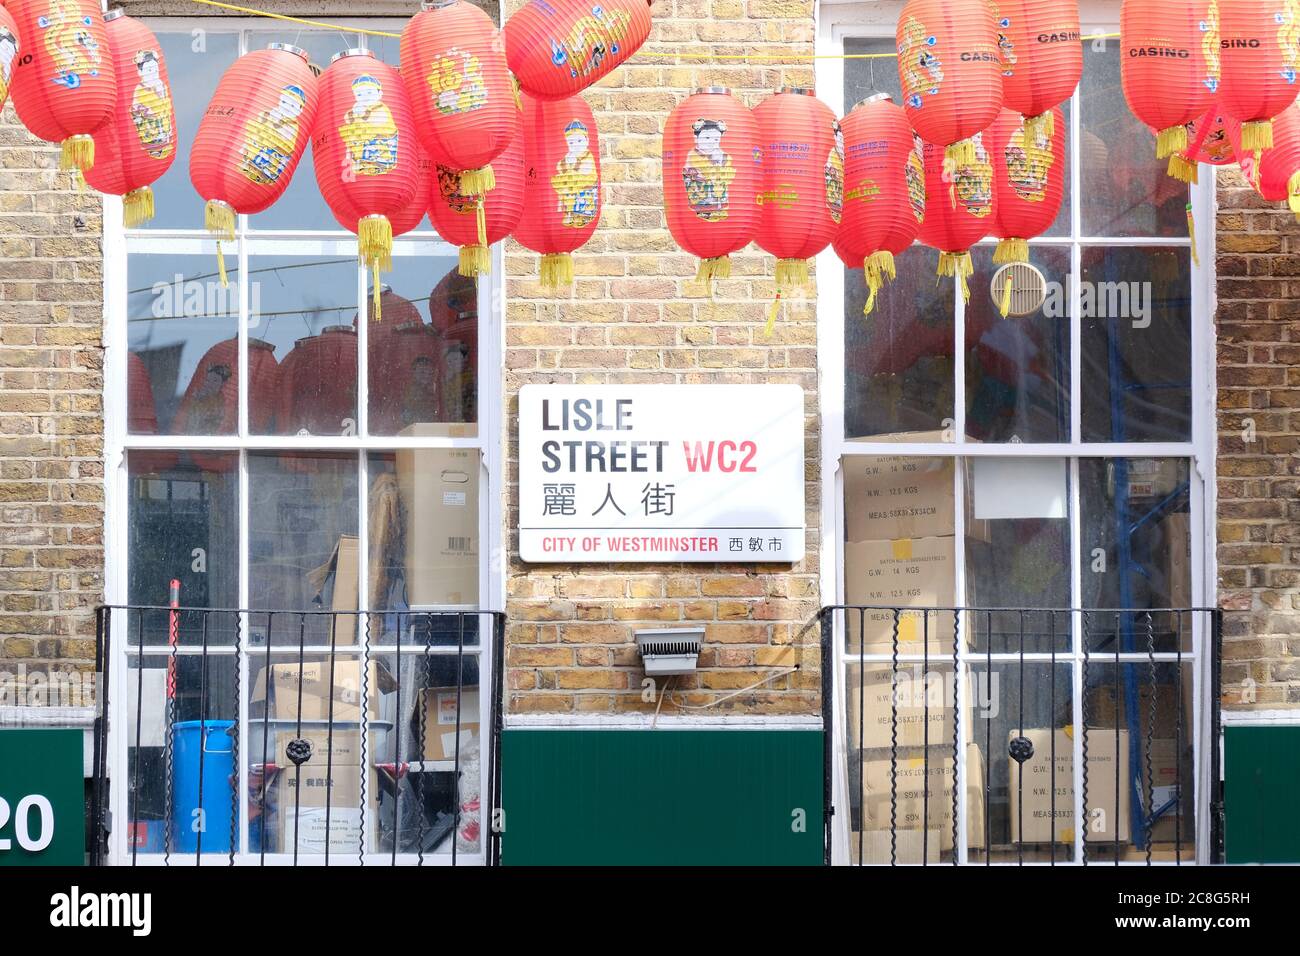 Lisle Street street sign with a row of red lanterns hanging above. The street is at the heart of Chinatown lines with restaurants. Stock Photo